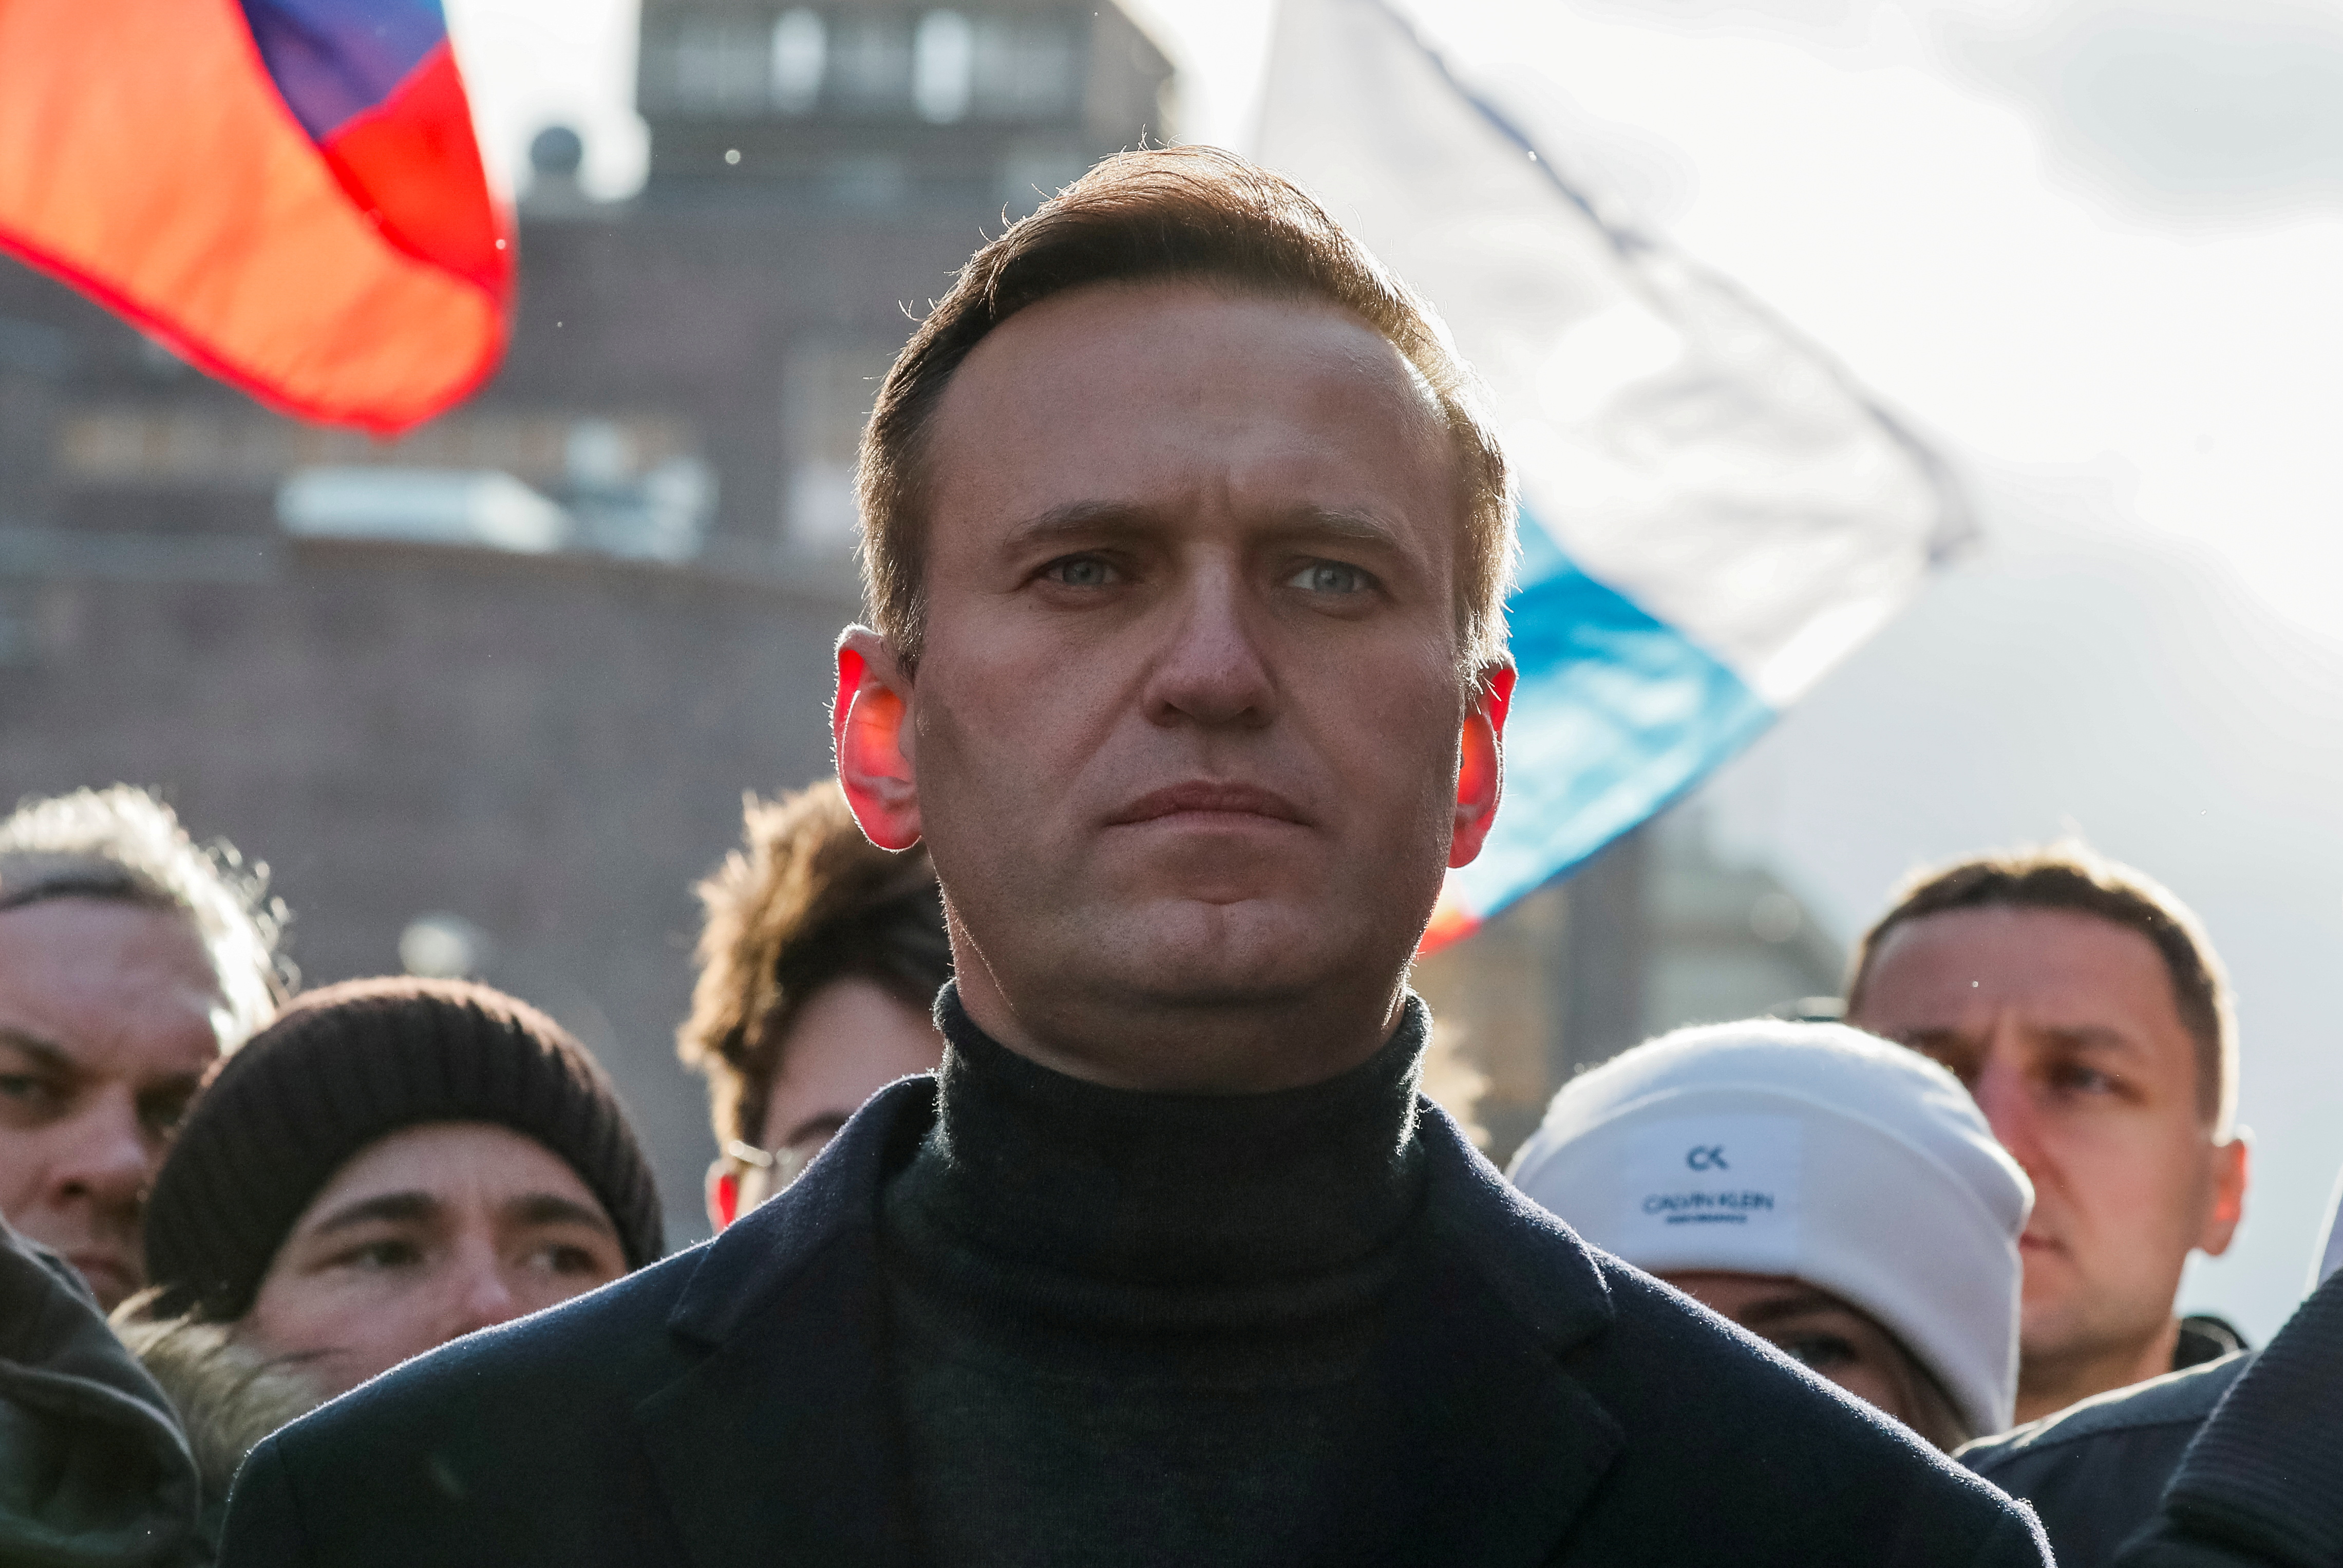 Russian opposition politician Alexei Navalny takes part in a rally to mark the 5th anniversary of opposition politician Boris Nemtsov's murder and to protest against proposed amendments to the country's constitution, in Moscow